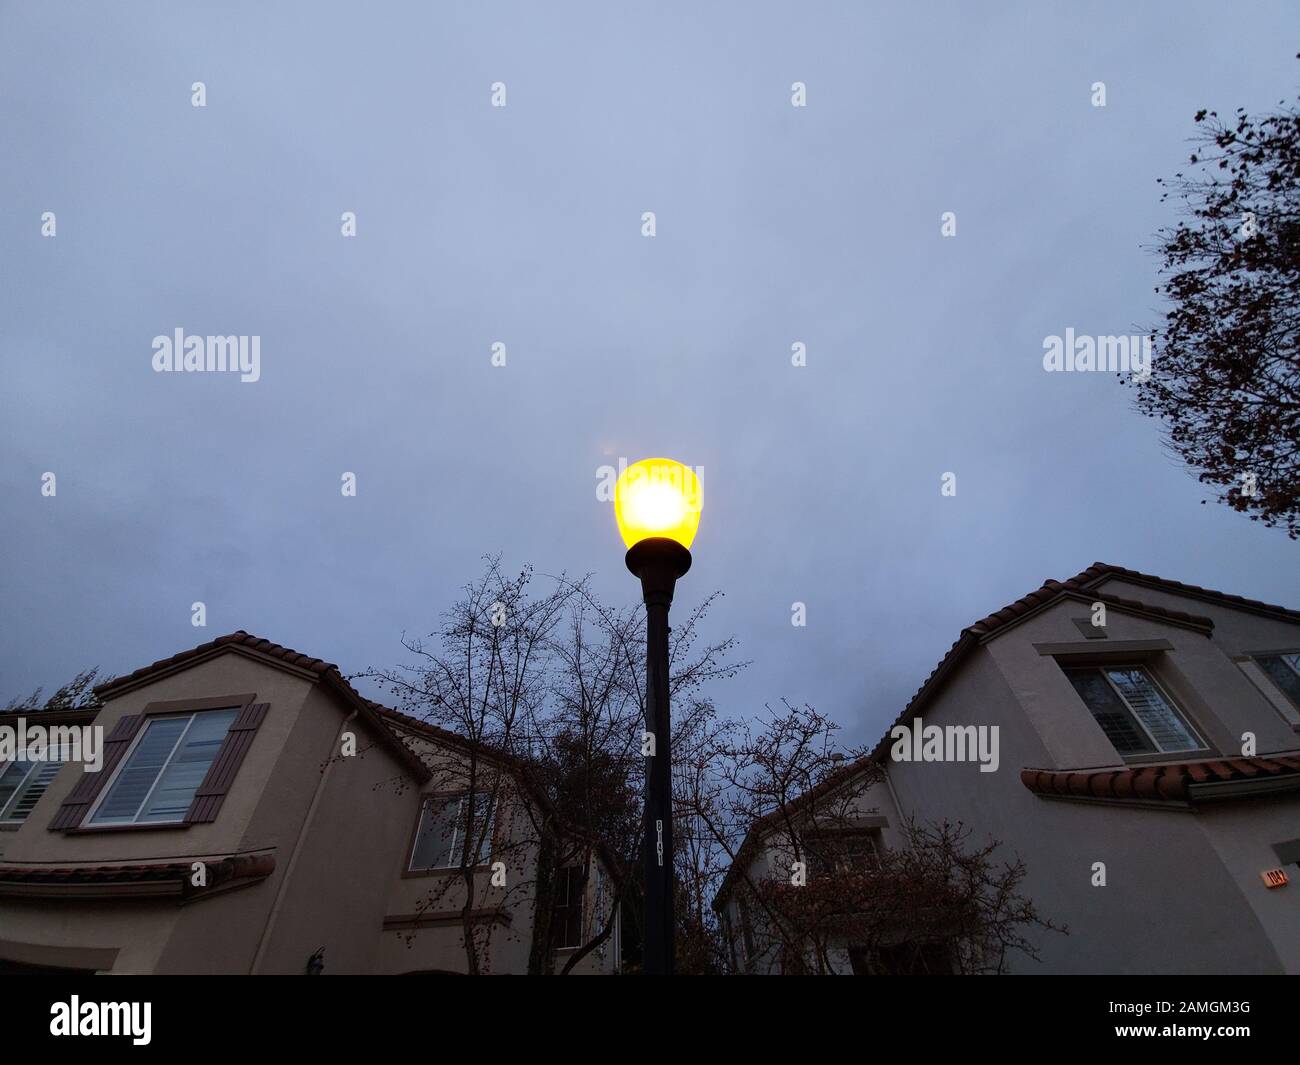 Close-up up top of street lamp, showing typical orange glow of a sodium vapor light, San Ramon, California, December 18, 2019. As more areas switch to LED street lighting, the color temperature of nightime lights is increasing, from the dark yellow of sodium vapor lamps to the bright white of LEDs. () Stock Photo